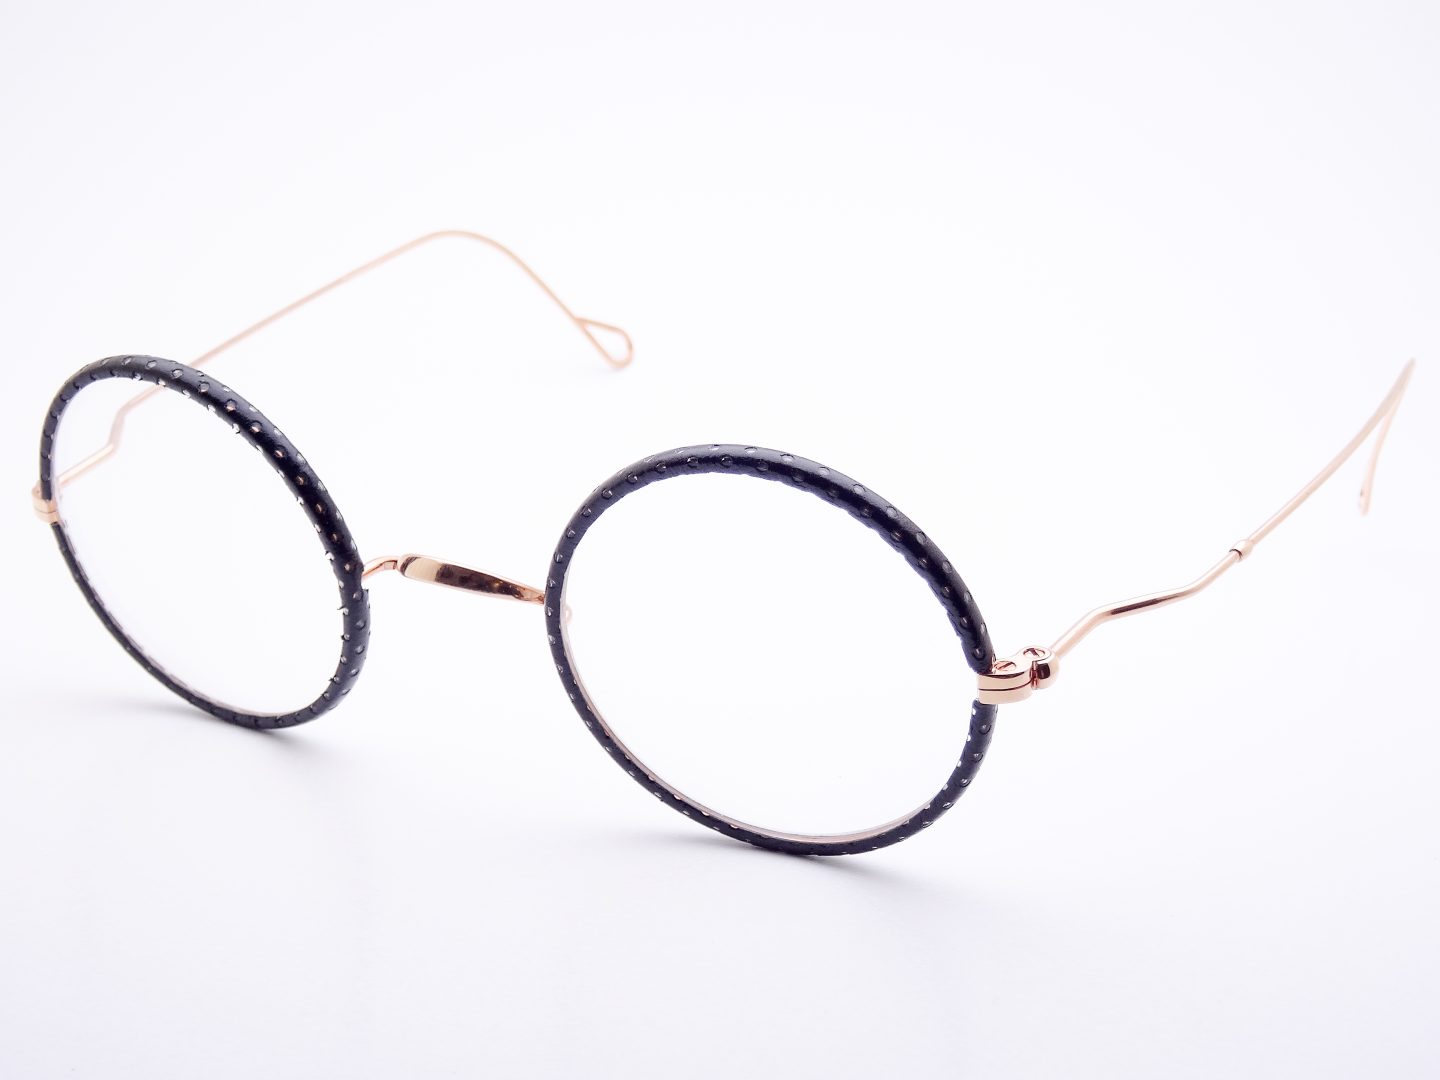 Gouverneur Audigier Latest Collection Featuring Rounded Leather Frames